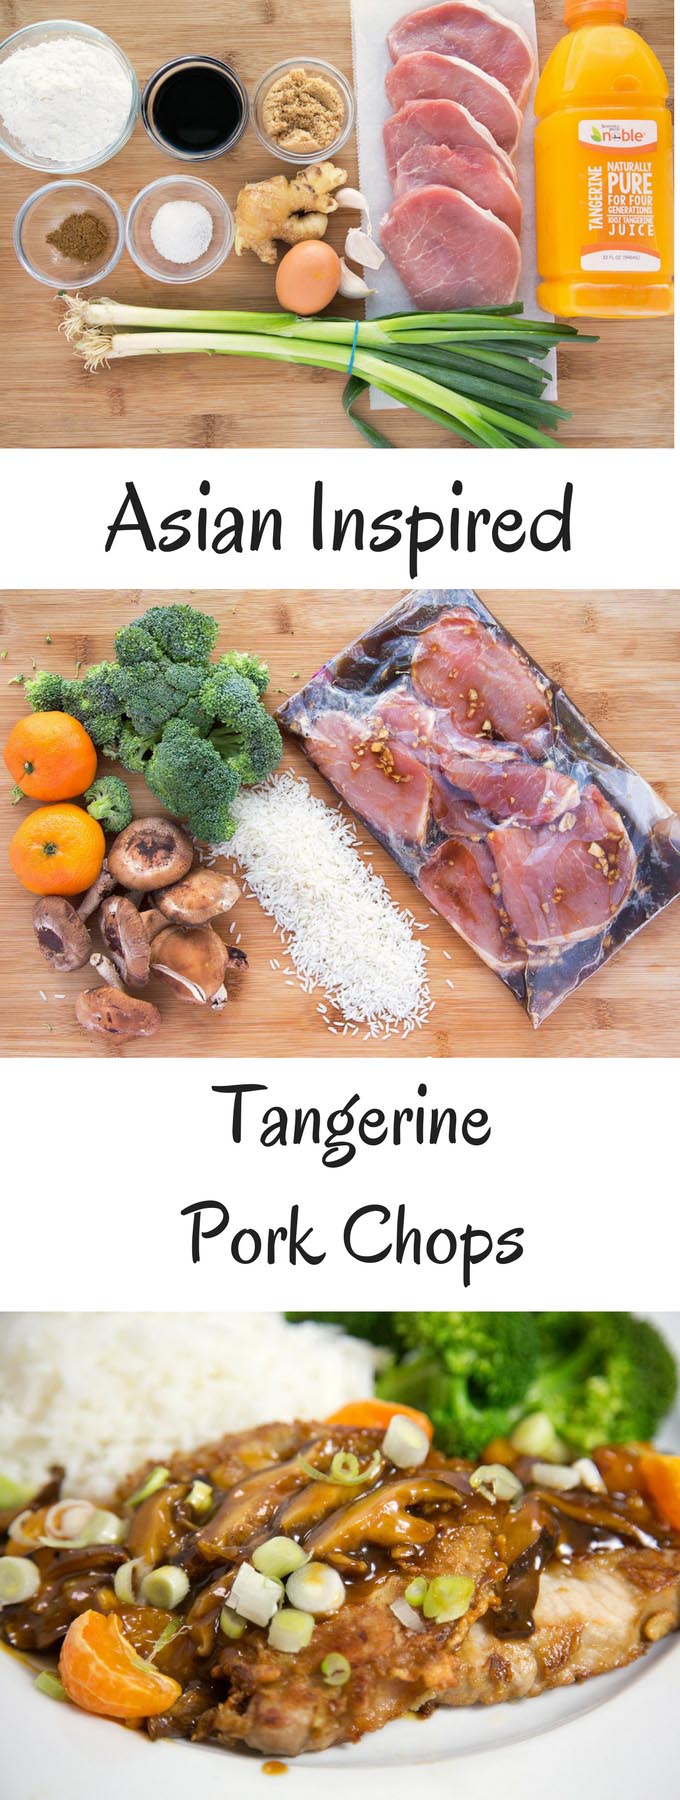 Make your week night meals into an occasion with my Asian Inspired Tangerine Pork Chop Recipe.